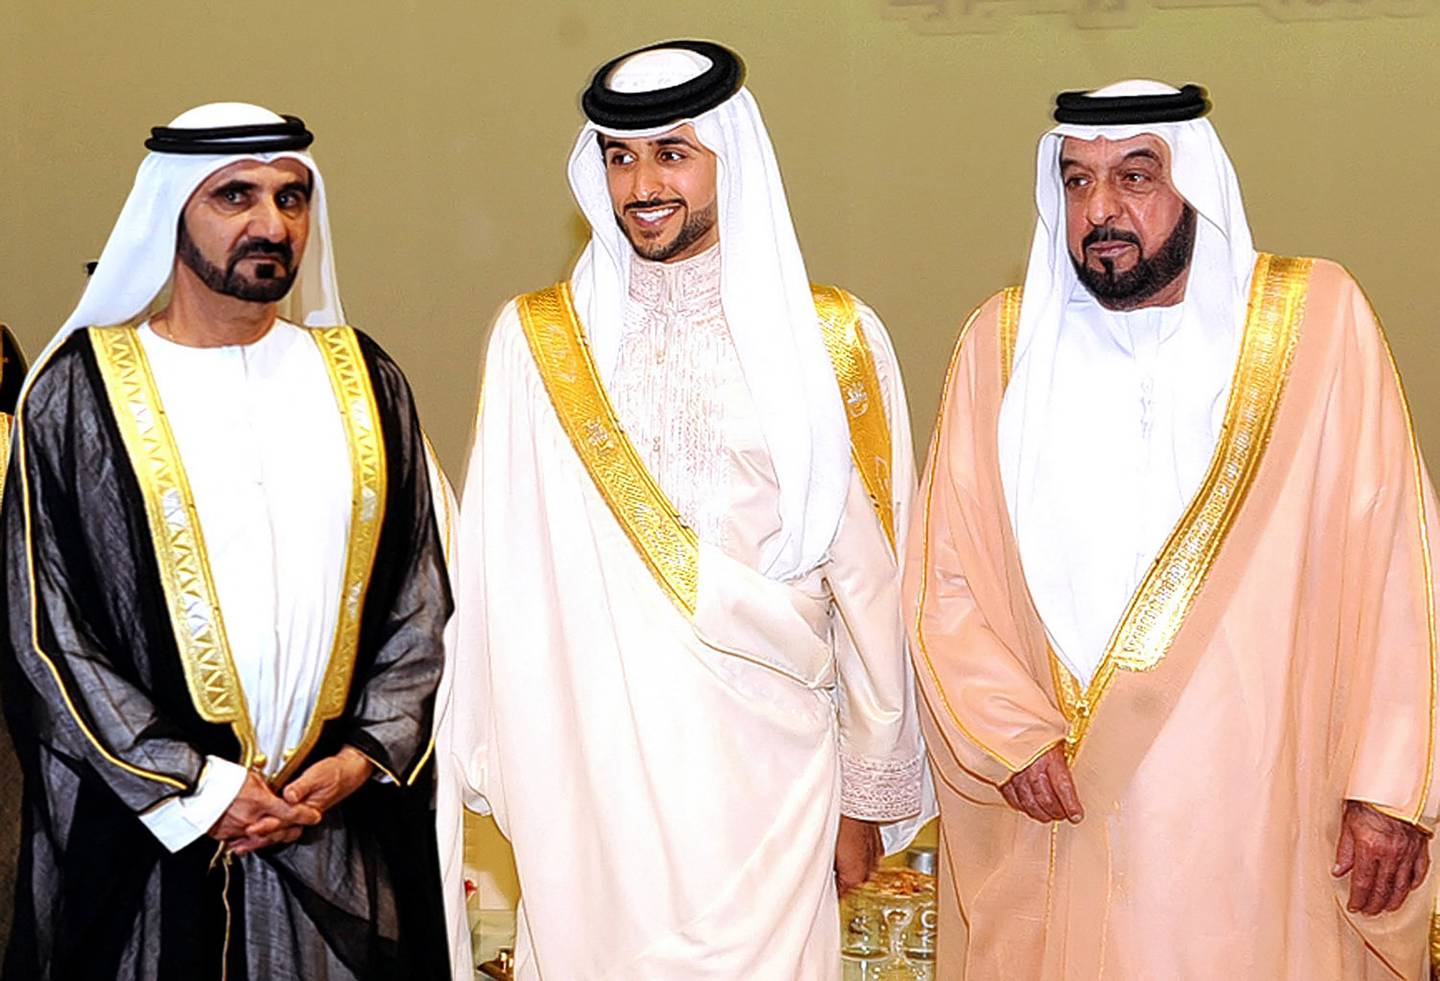 The Bahrain News Agency has marked the death of Sheikh Khalifa with an image that shows the UAE President with Sheikh Mohammed bin Rashid, Vice President and Ruler of Dubai, and Bahrain's Sheikh Nasser bin Hamad at the young royal’s wedding in 2009. Photo: BNA